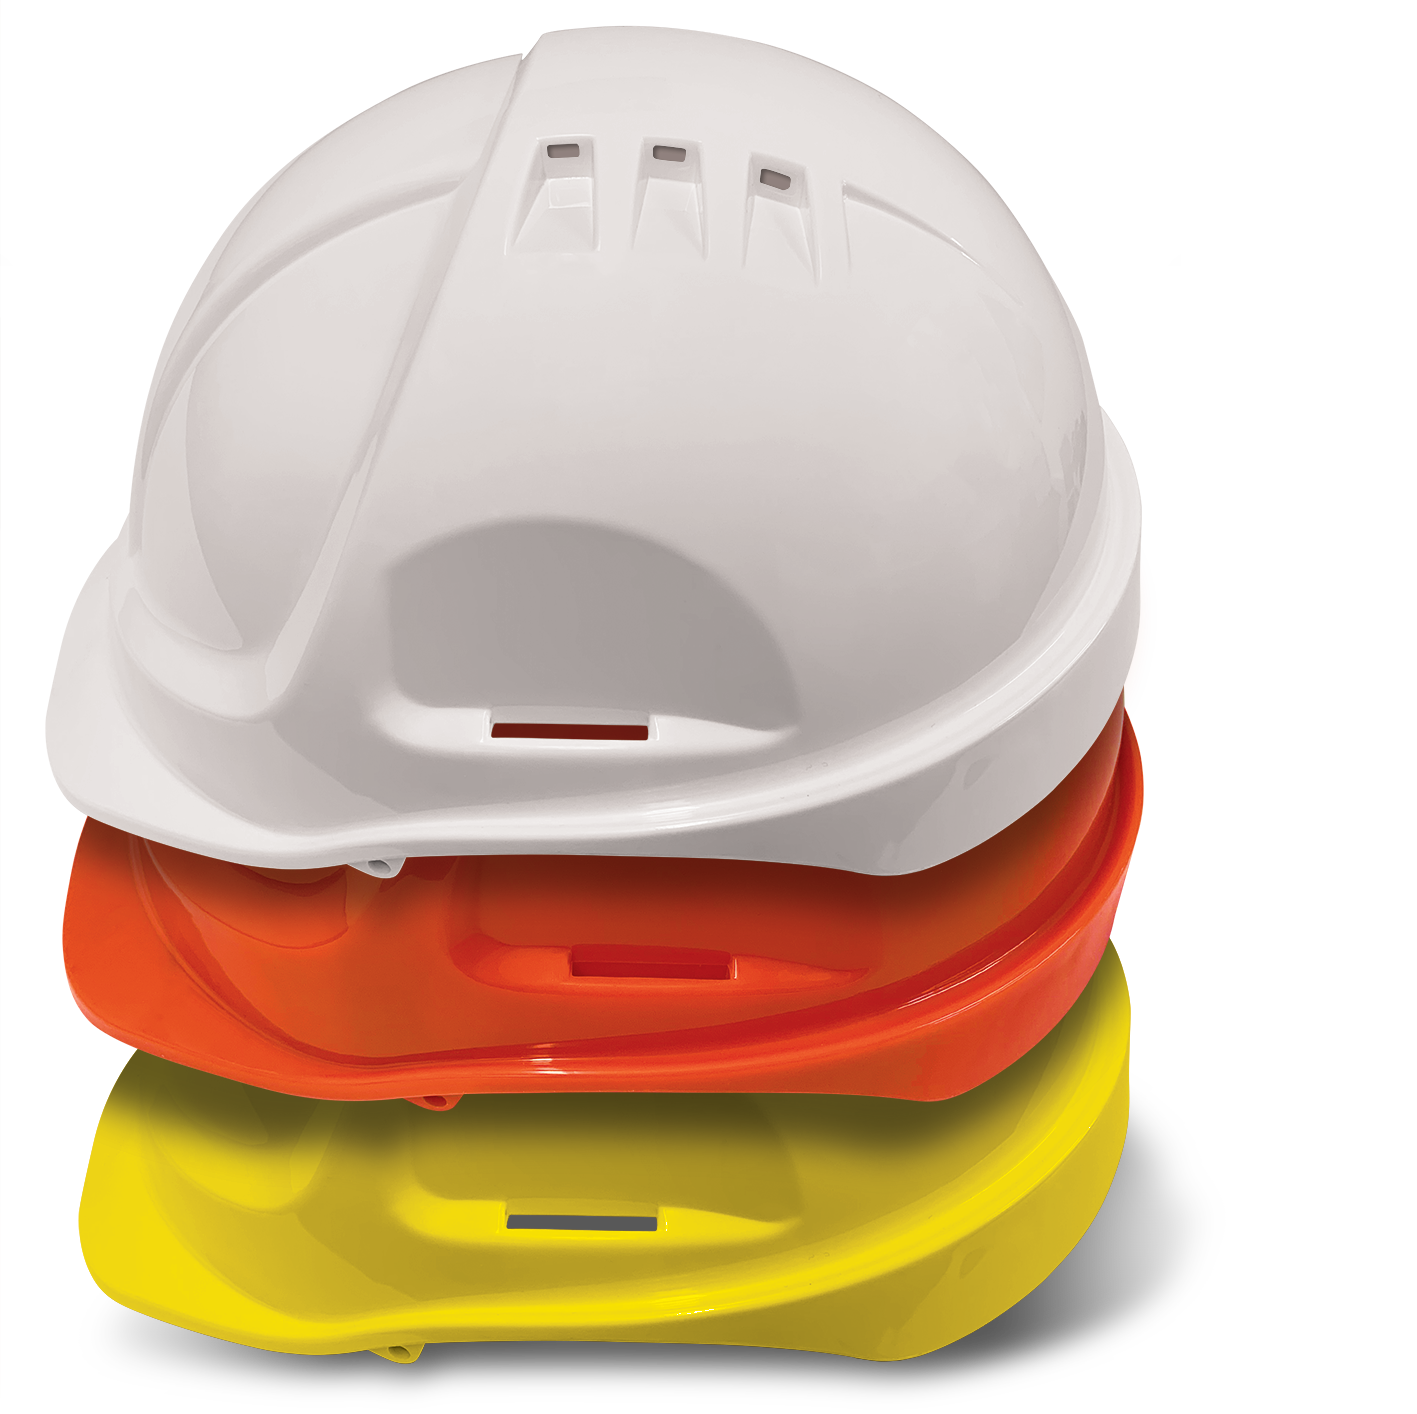 Armour Safety Products Ltd. - Armour ABS Hard Hat Vented – EN397